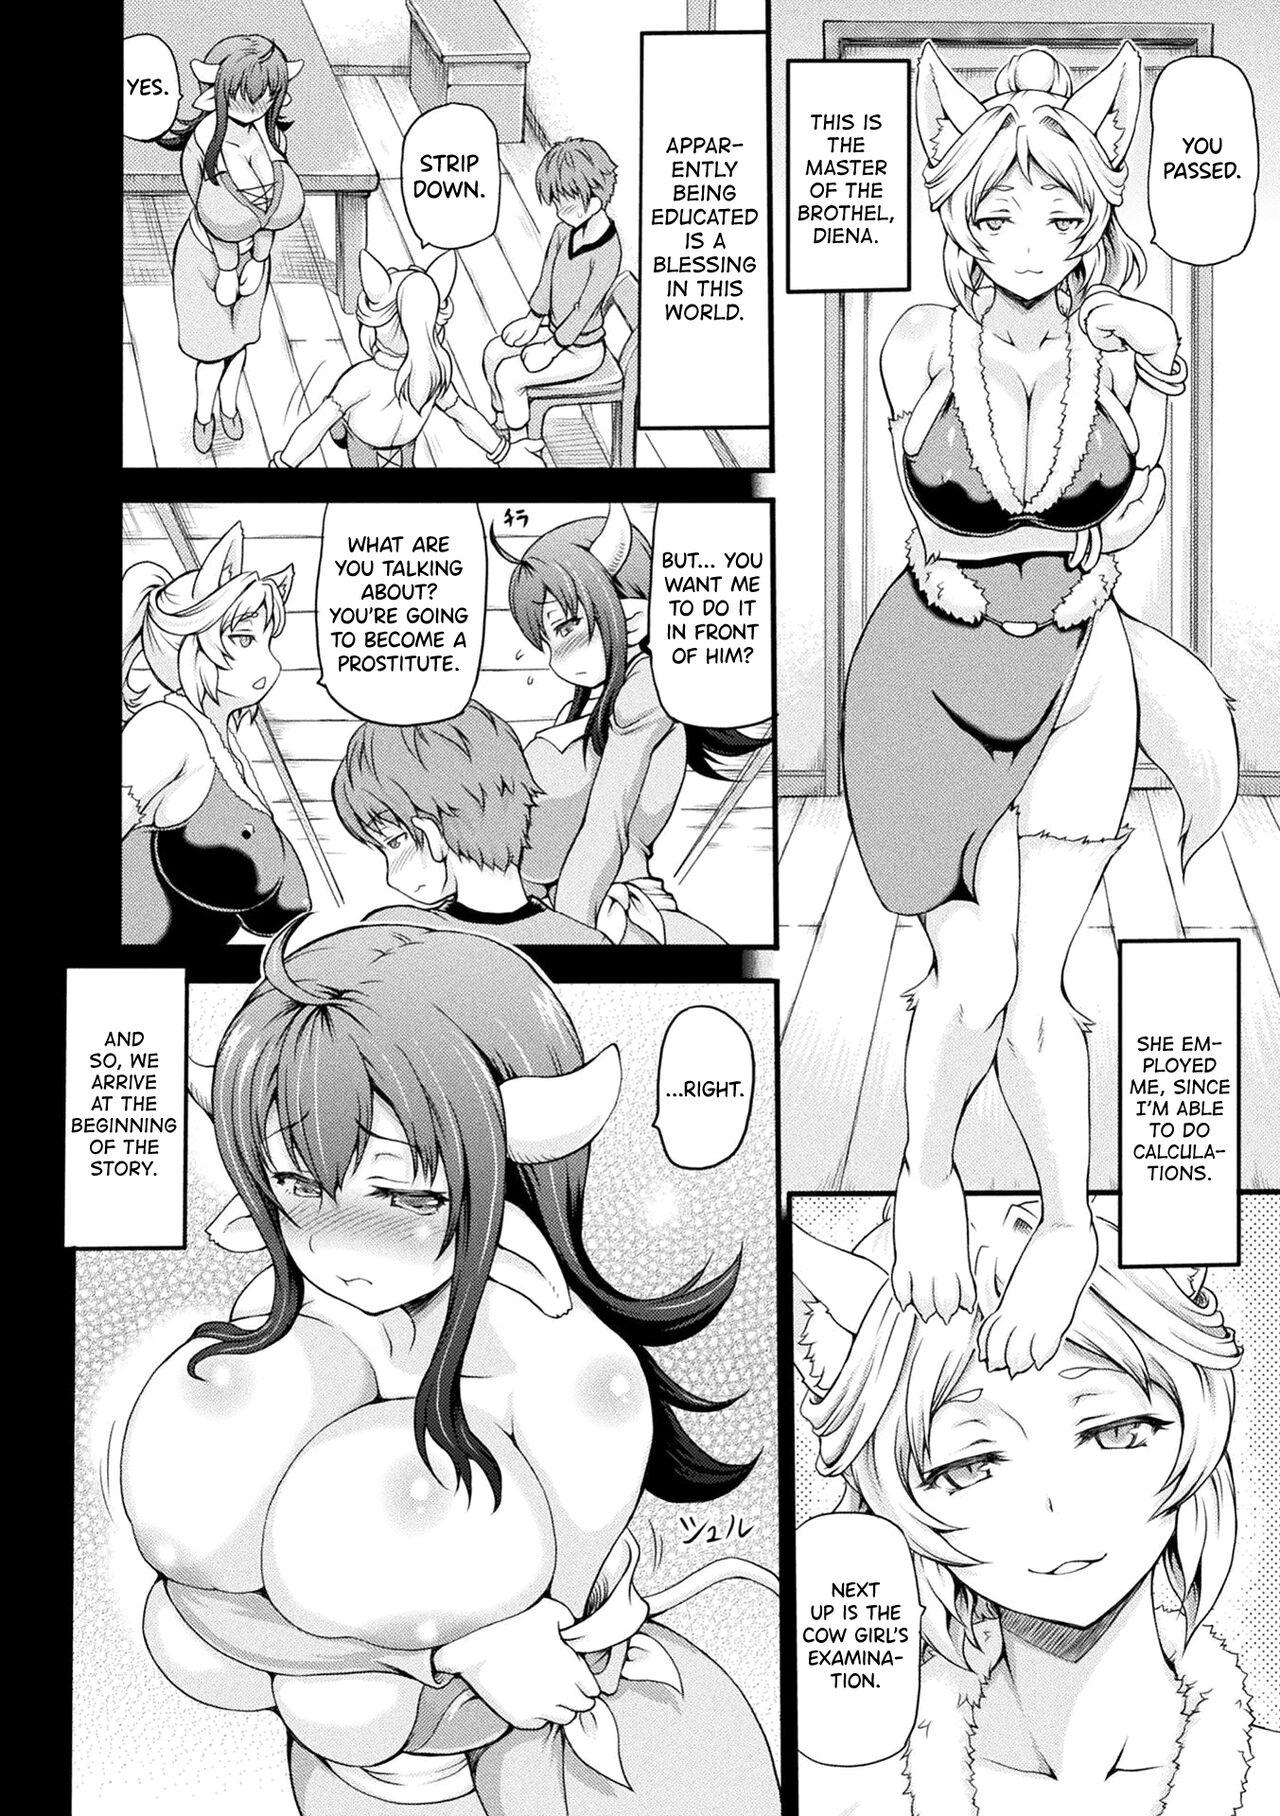 Large Isekai Shoukan Ch.1-3 Wives - Page 4